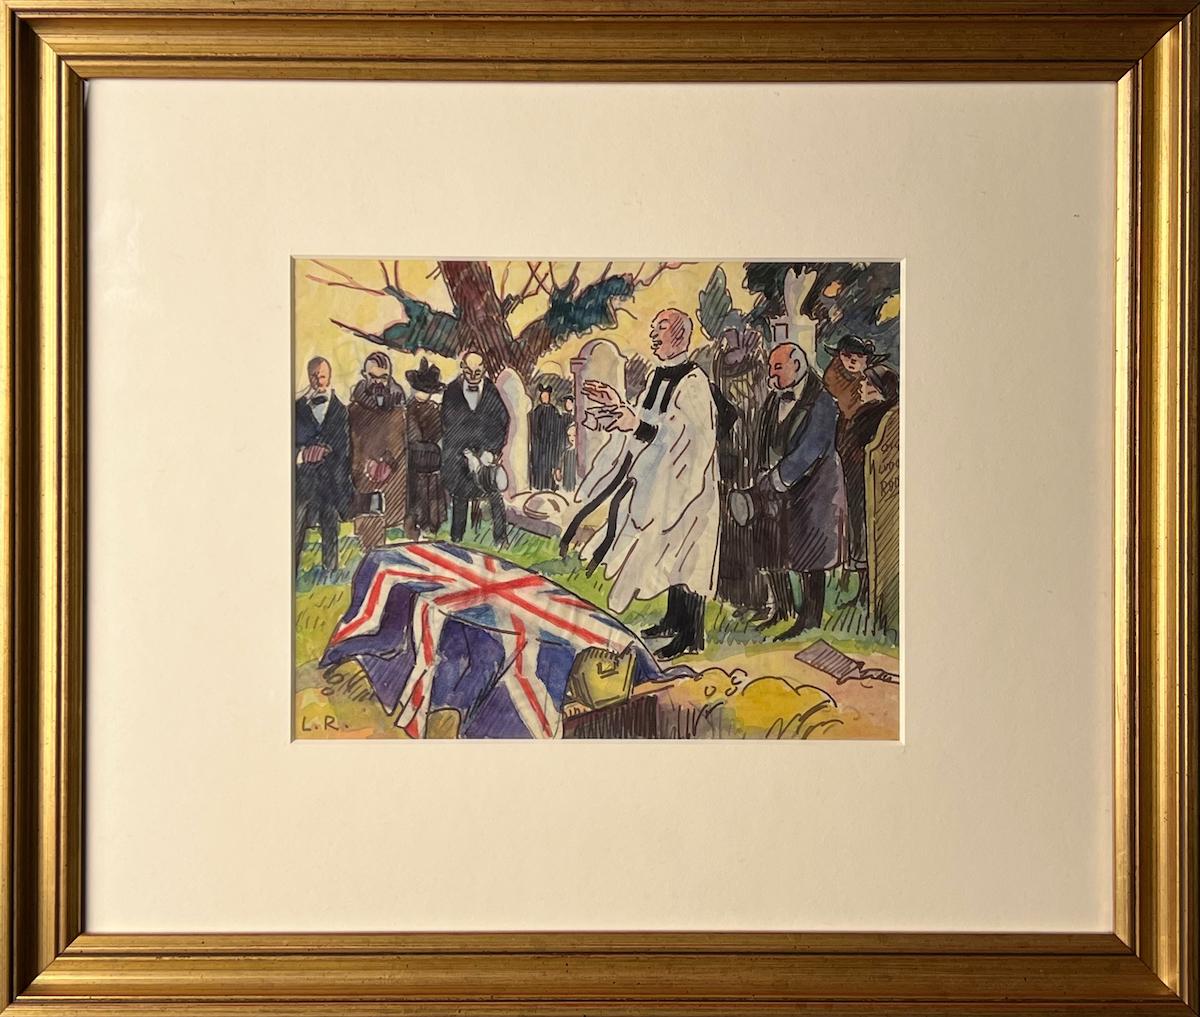 *UK BUYERS WILL PAY AN ADDITIONAL 20% VAT ON TOP OF THE ABOVE PRICE

Funeral by Ludovic-Rodo Pissarro (1878-1952)
Watercolour and ink on paper
17.6 x 21.2 cm (6 ⁷/₈ x 8 ³/₈ inches)
Signed with the Artist’s initials lower left, L.R.
Created circa